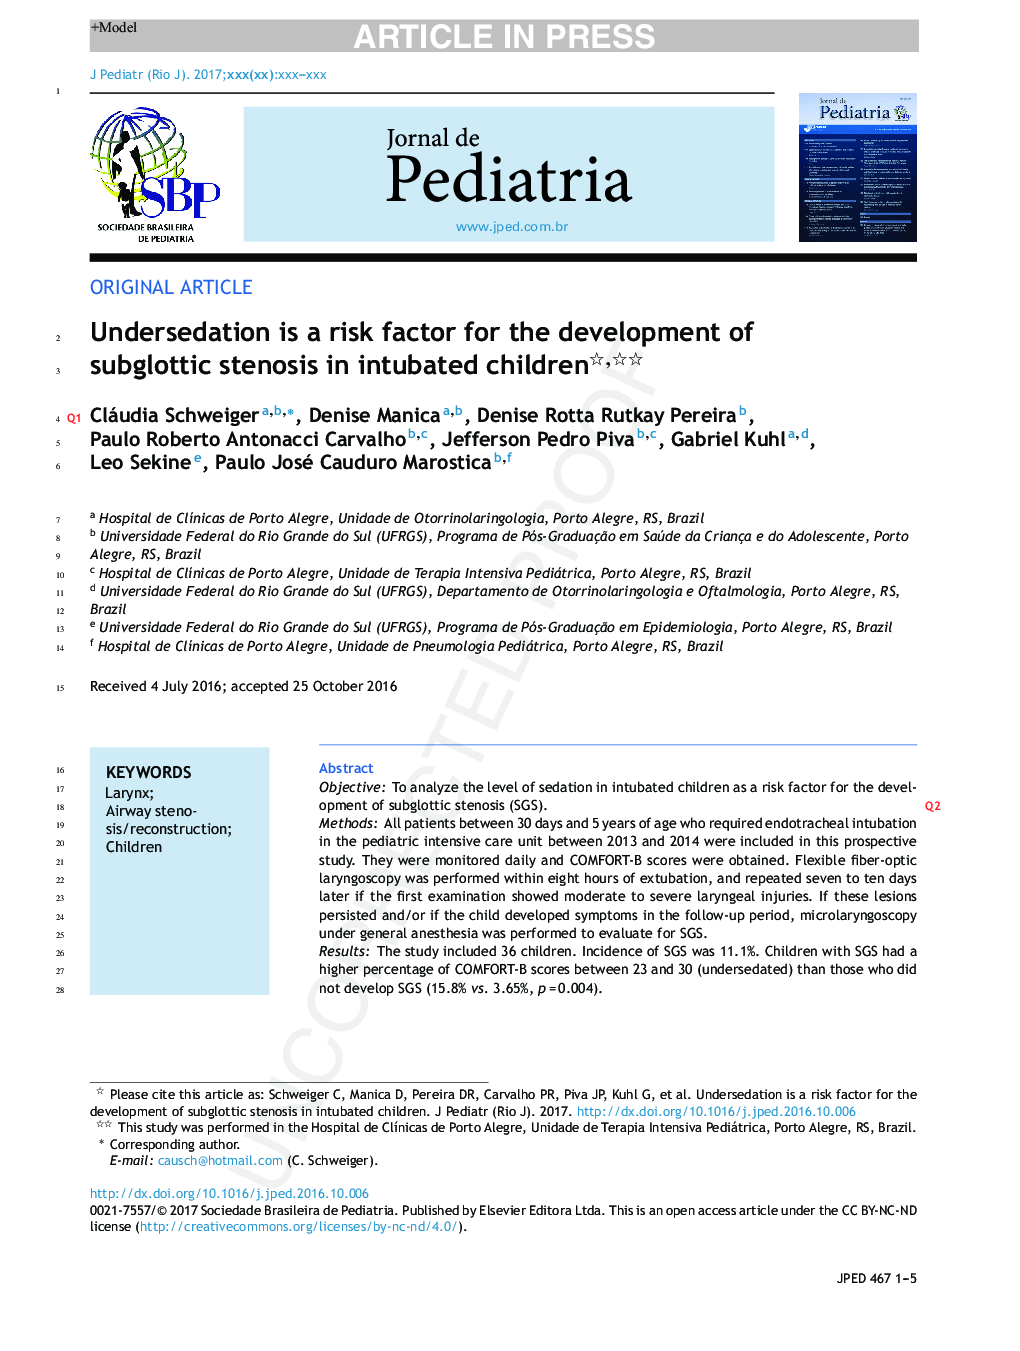 Undersedation is a risk factor for the development of subglottic stenosis in intubated children